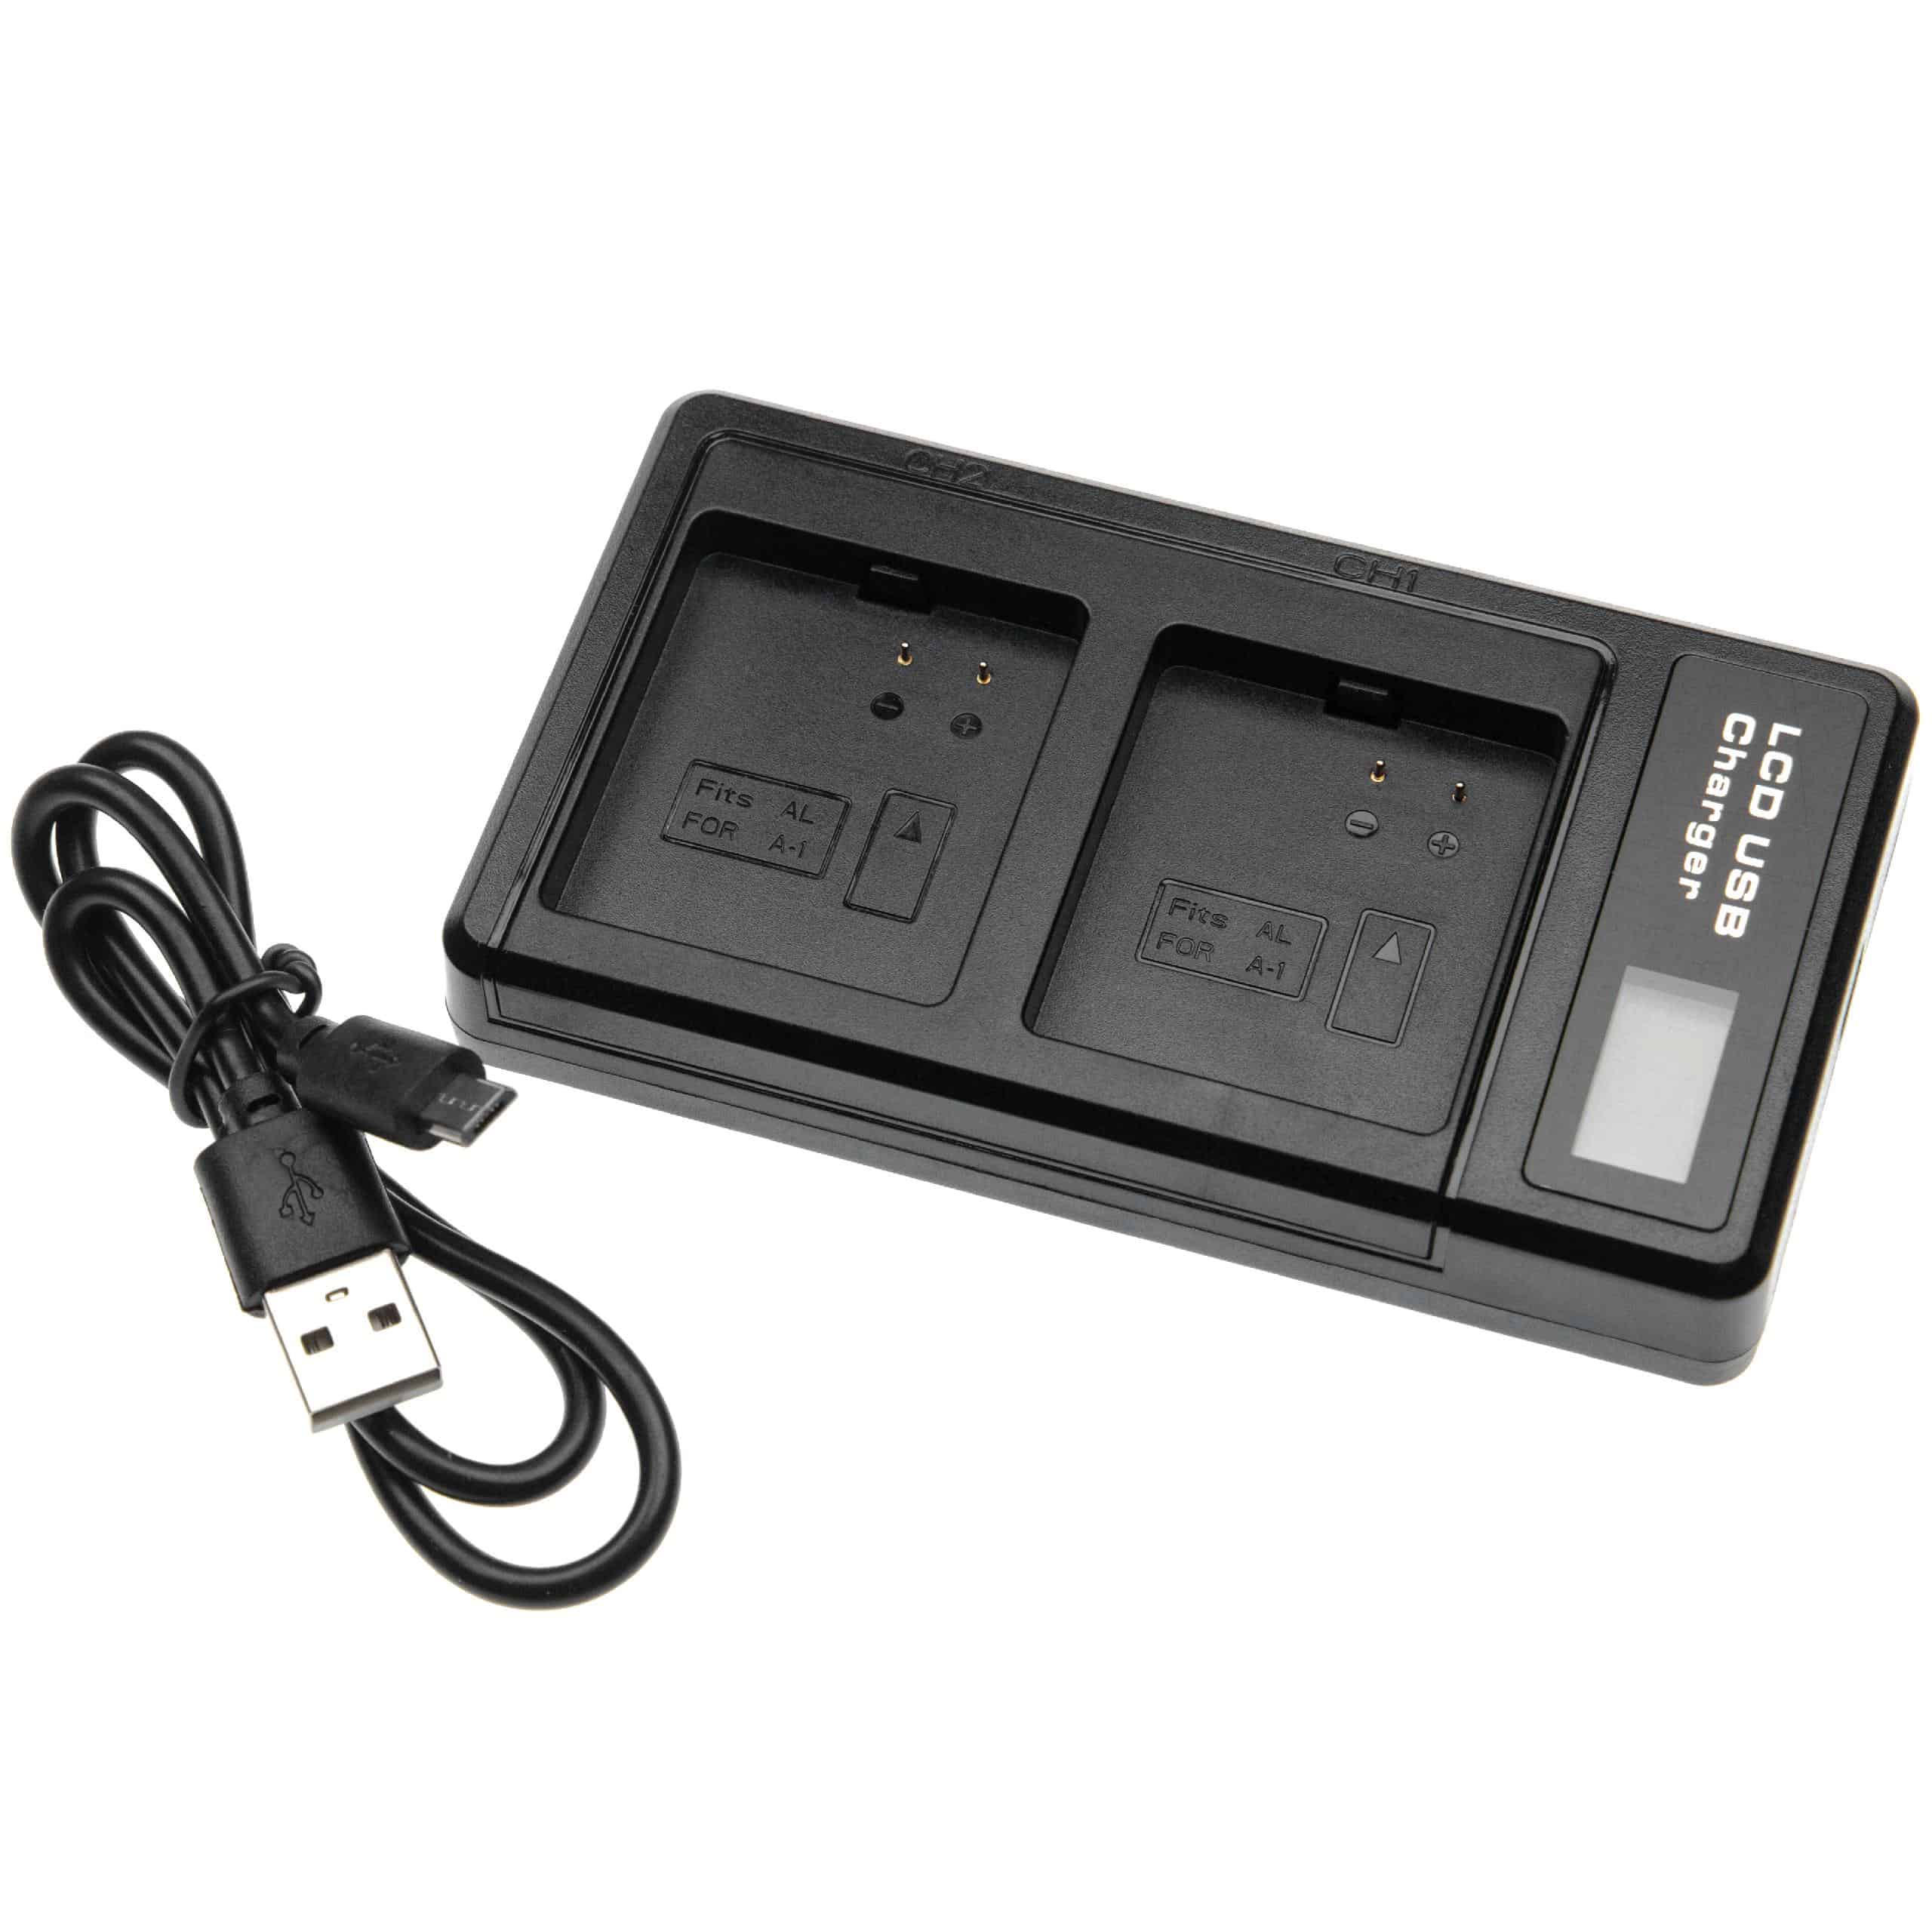 vhbw USB Dual Charger - Charging Station with LC Display